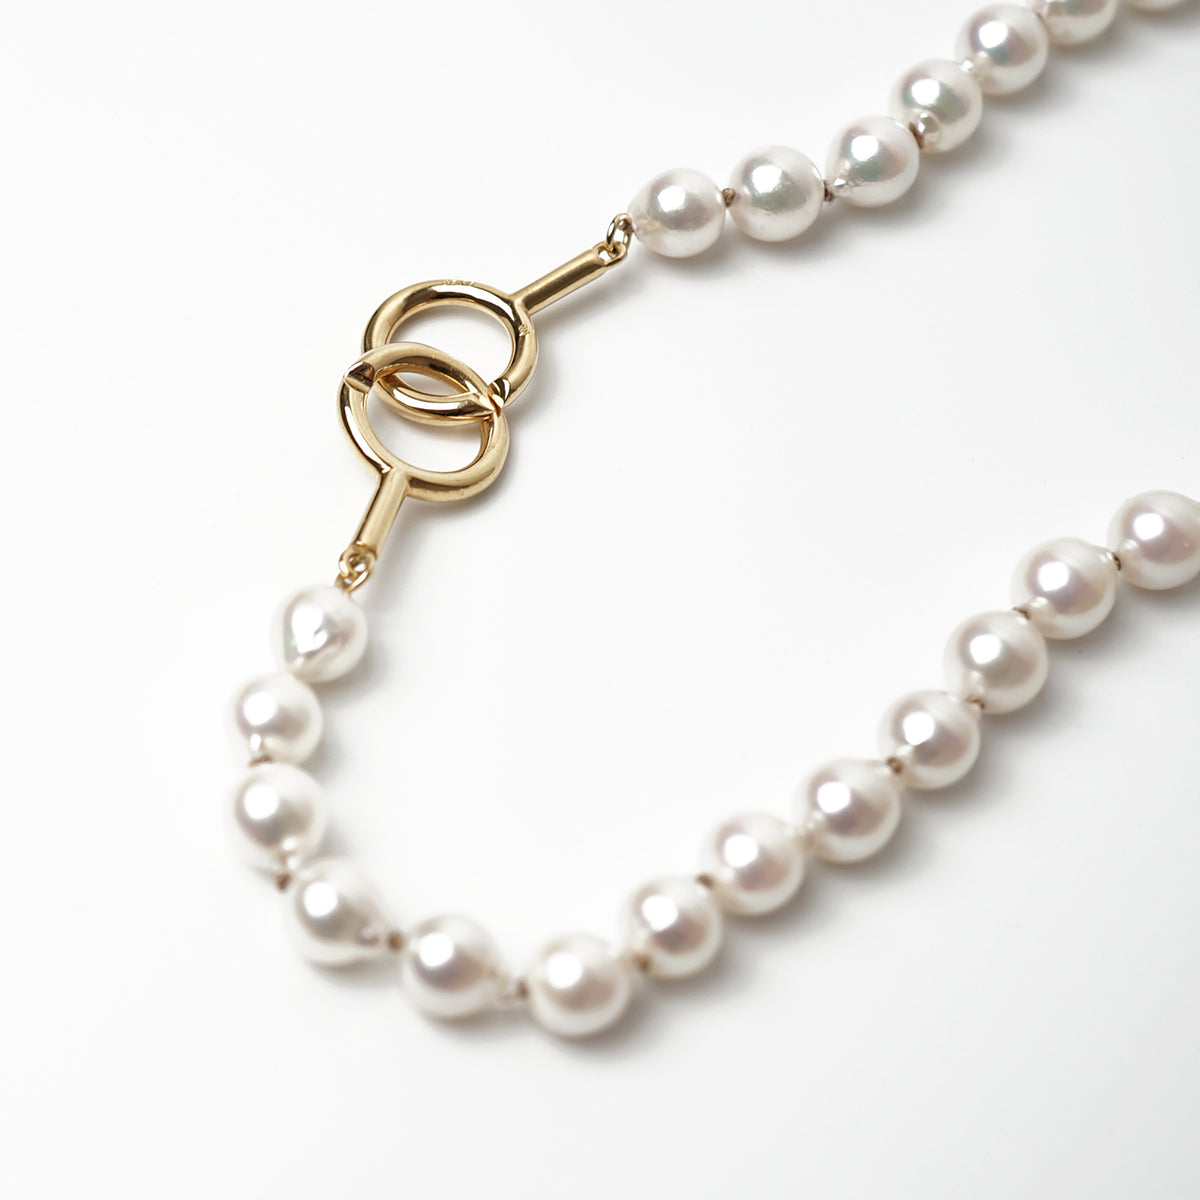 Baroque pearl バロックパール ネックレス